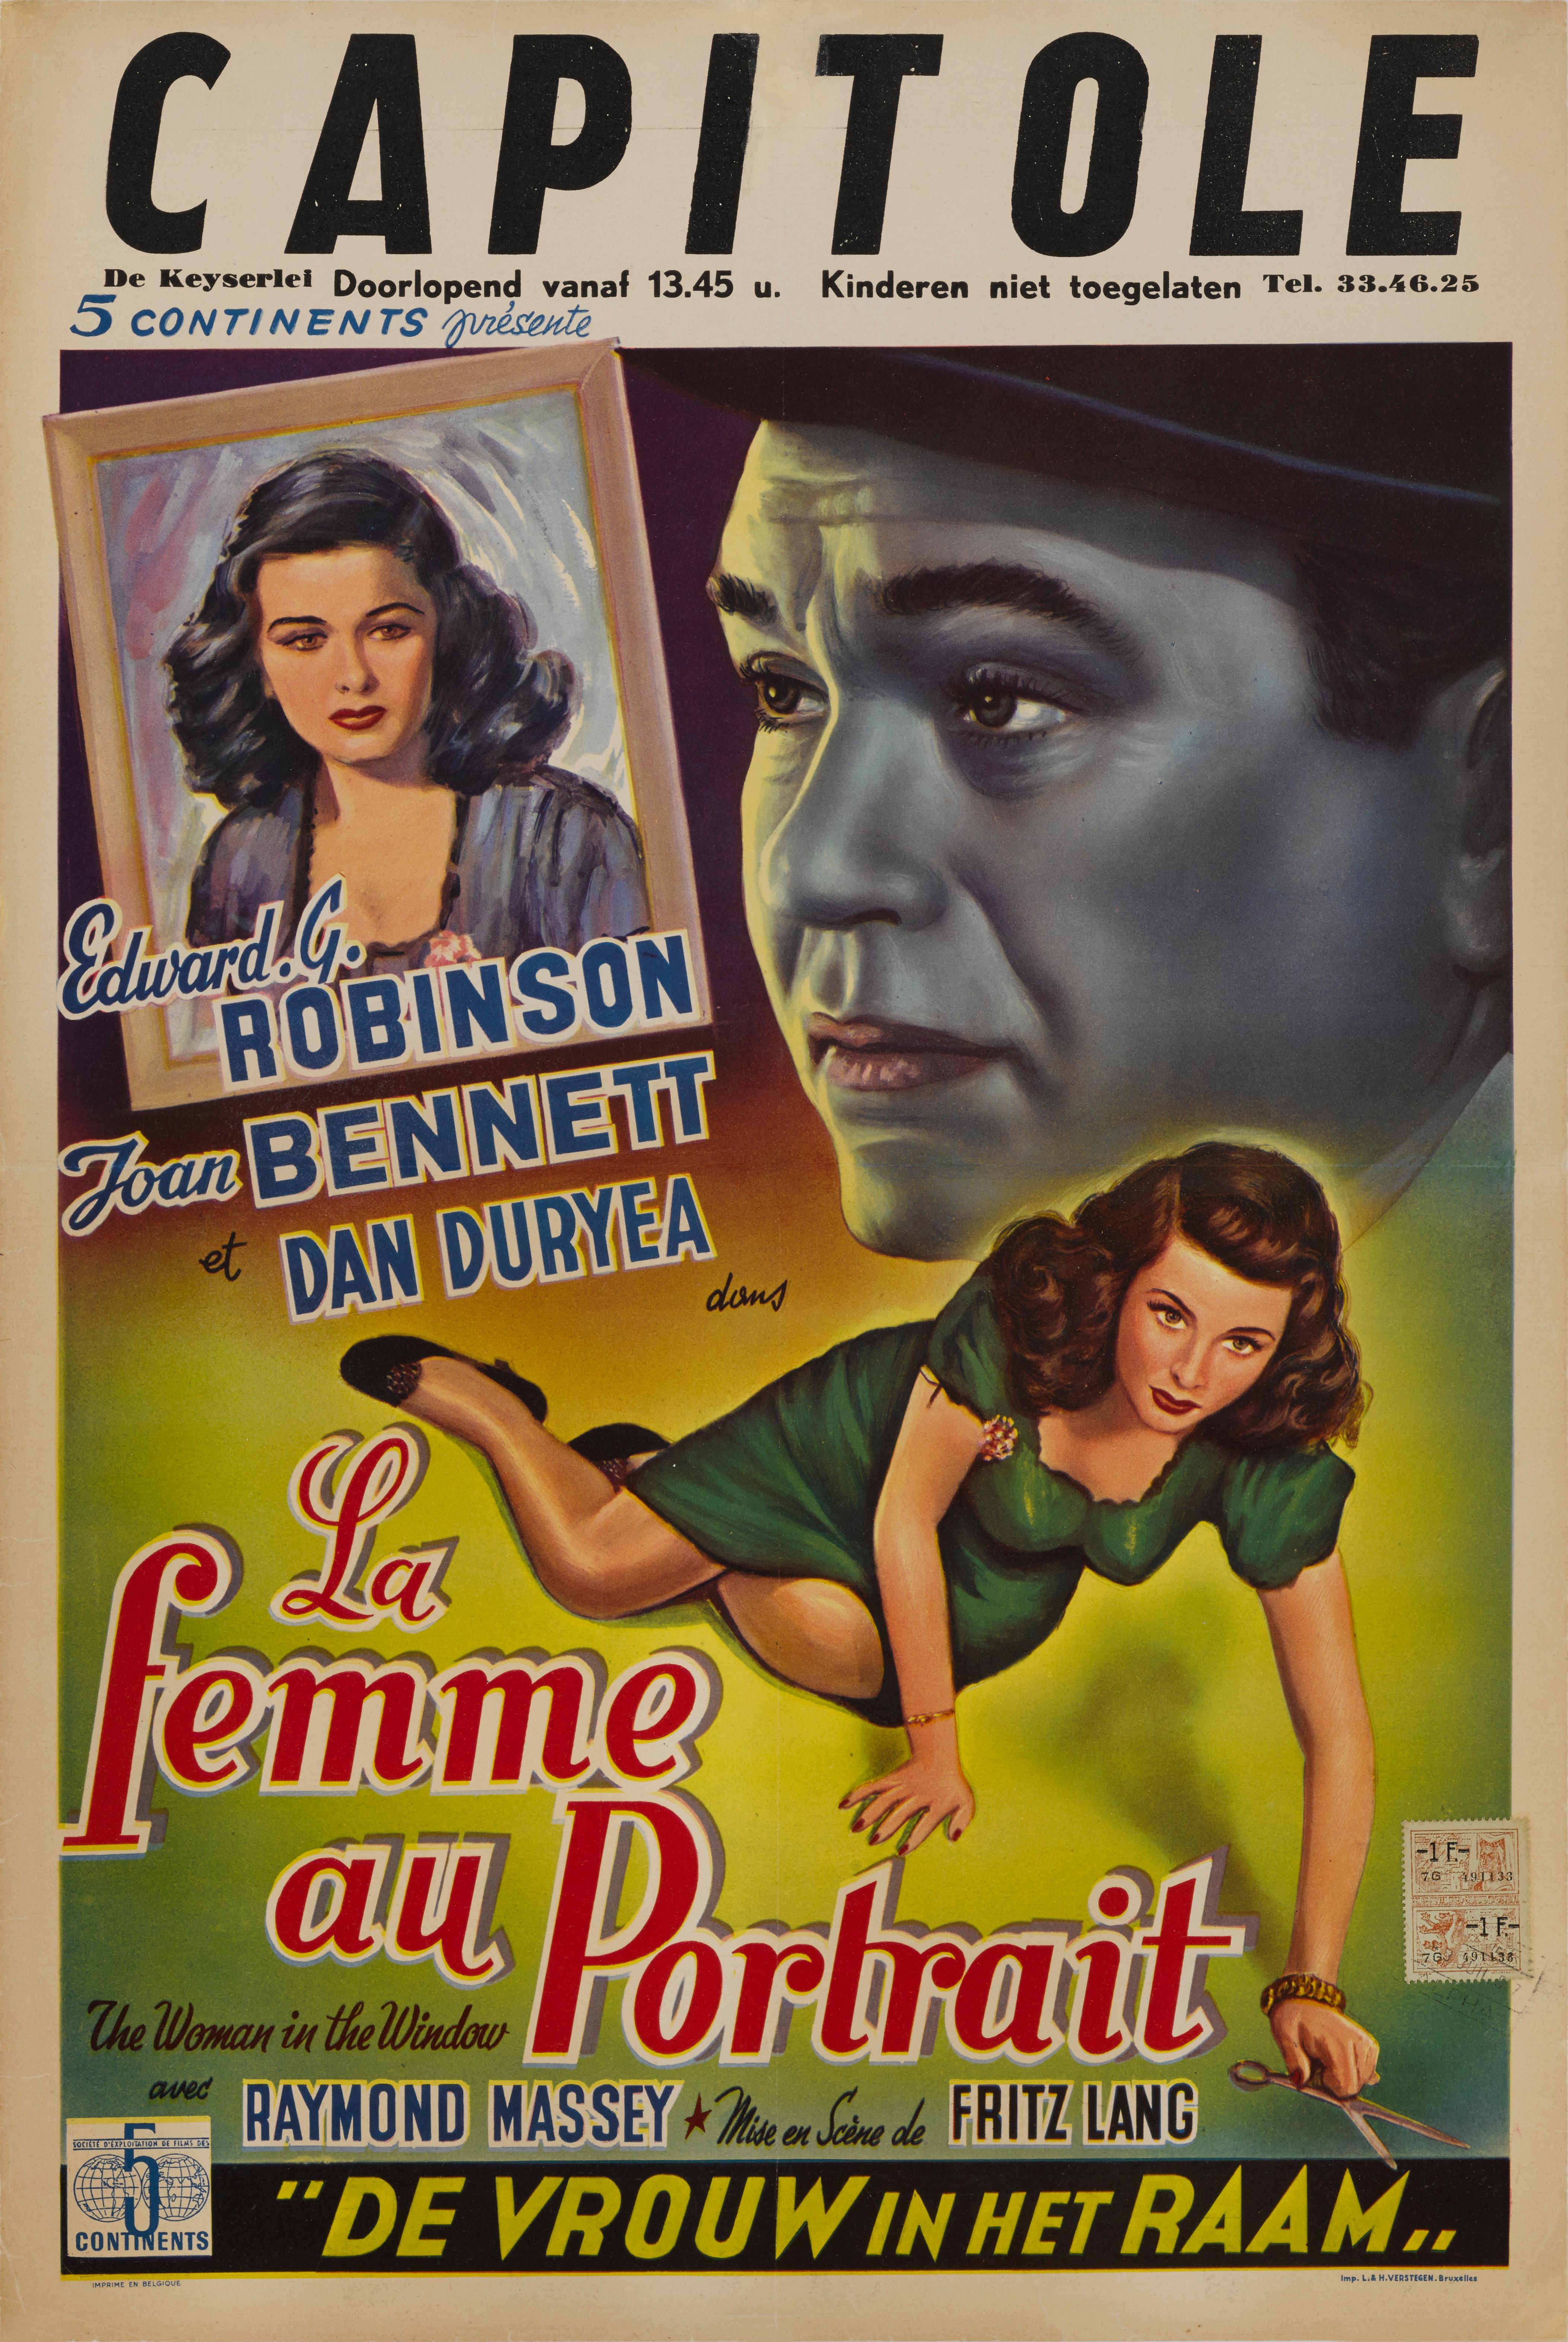 Original Belgian film poster for Fritz Langs 1944 Film Noir starring Edward G. Robinson, Joan Bennett
This atmospheric poster was designed for the films Belgian re-release in the 1950s
The poster is conservation linen backed and would be shipped